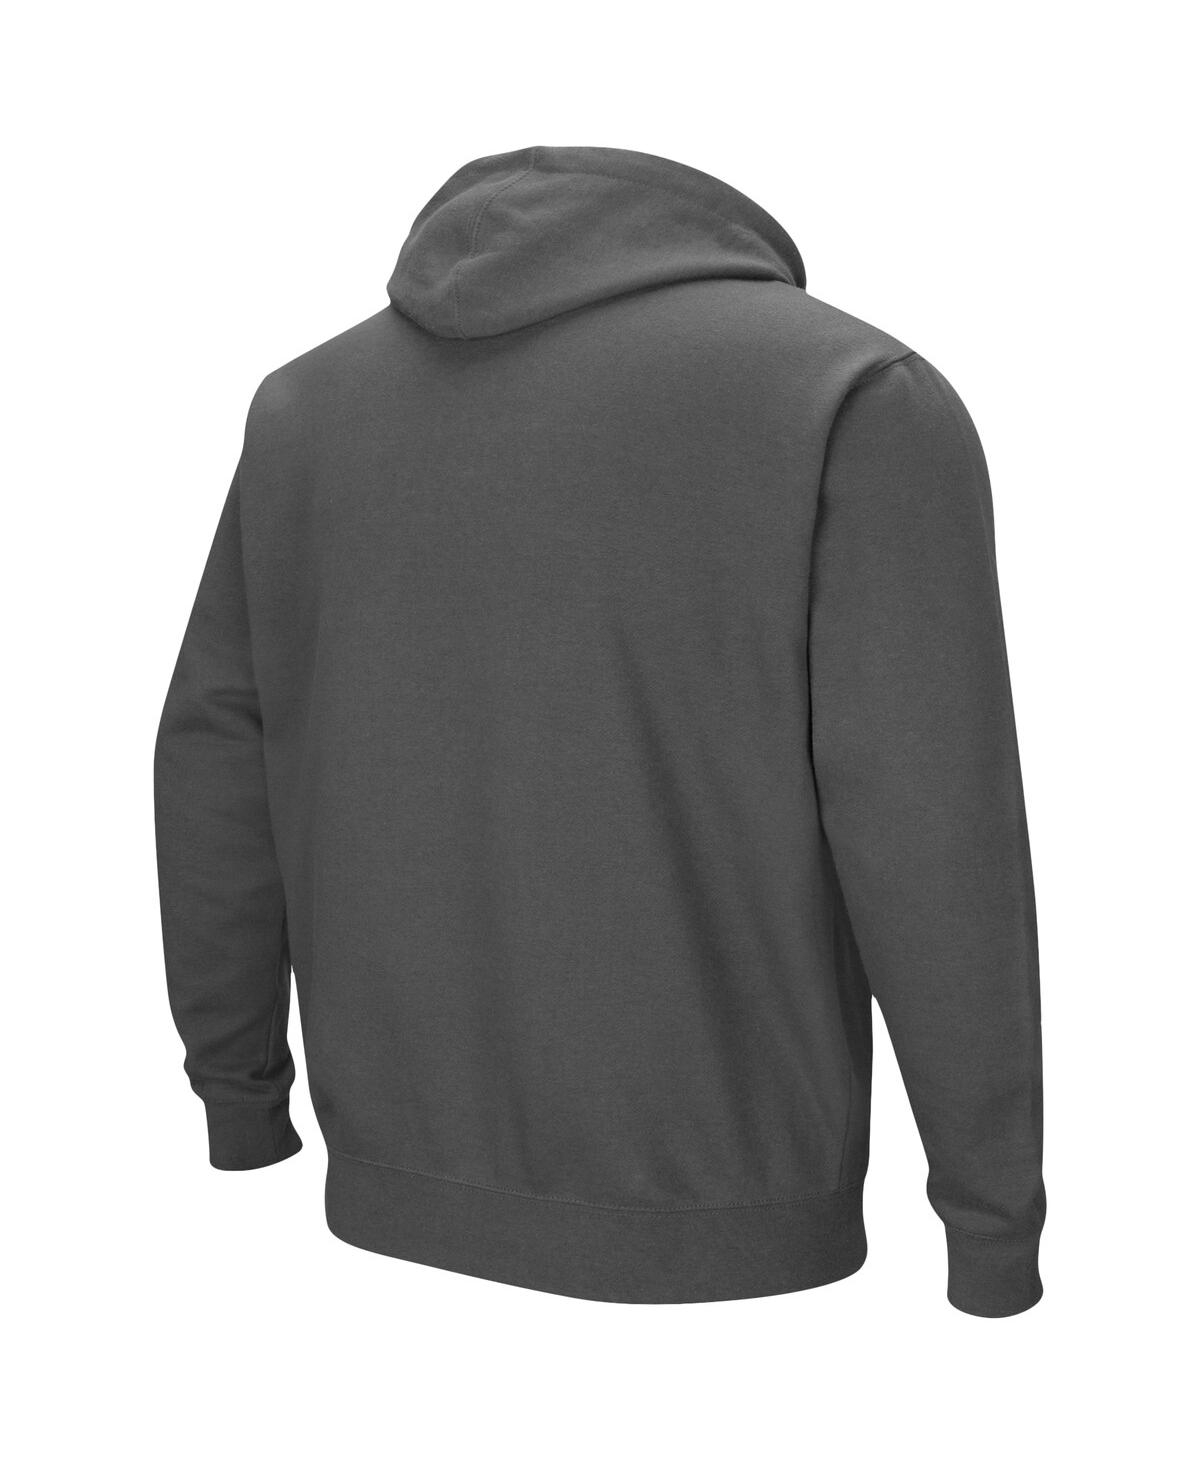 Shop Colosseum Men's  Charcoal Baylor Bears Arch And Logo 3.0 Pullover Hoodie